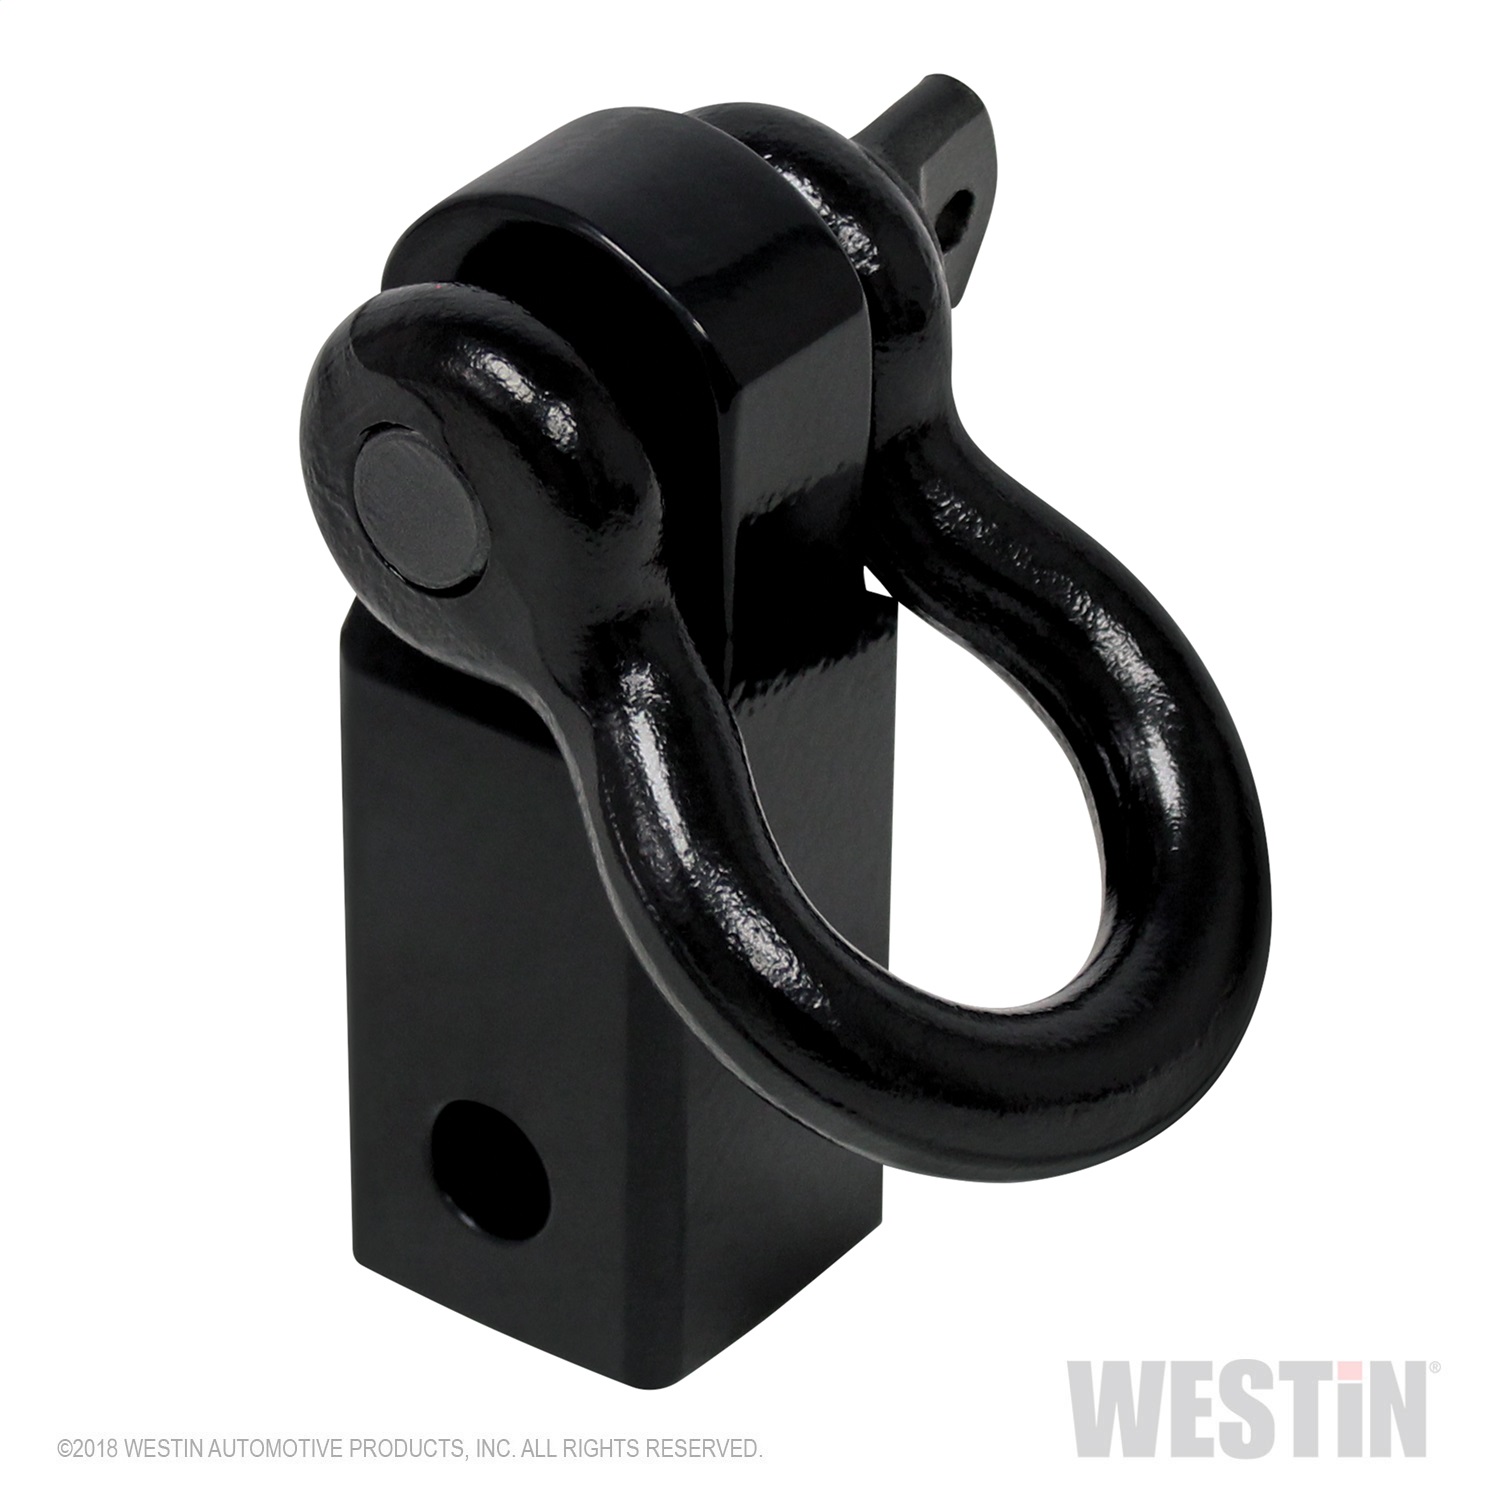 Westin 47-3205 Receiver Bow Shackle Kit